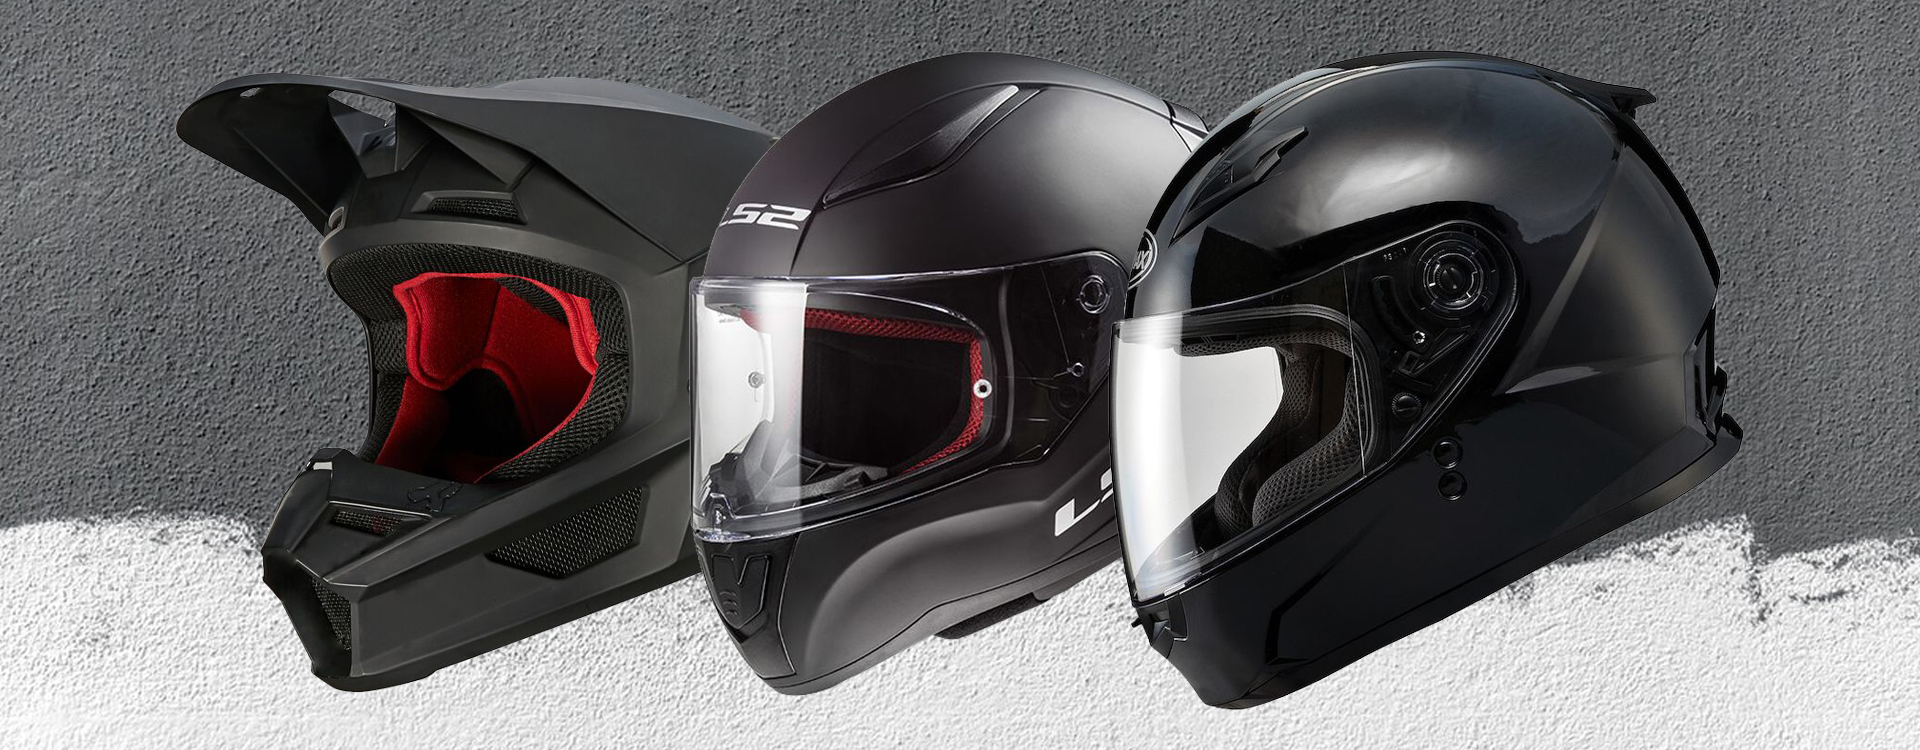 5 Coolest Motorcycle Helmets for Kids